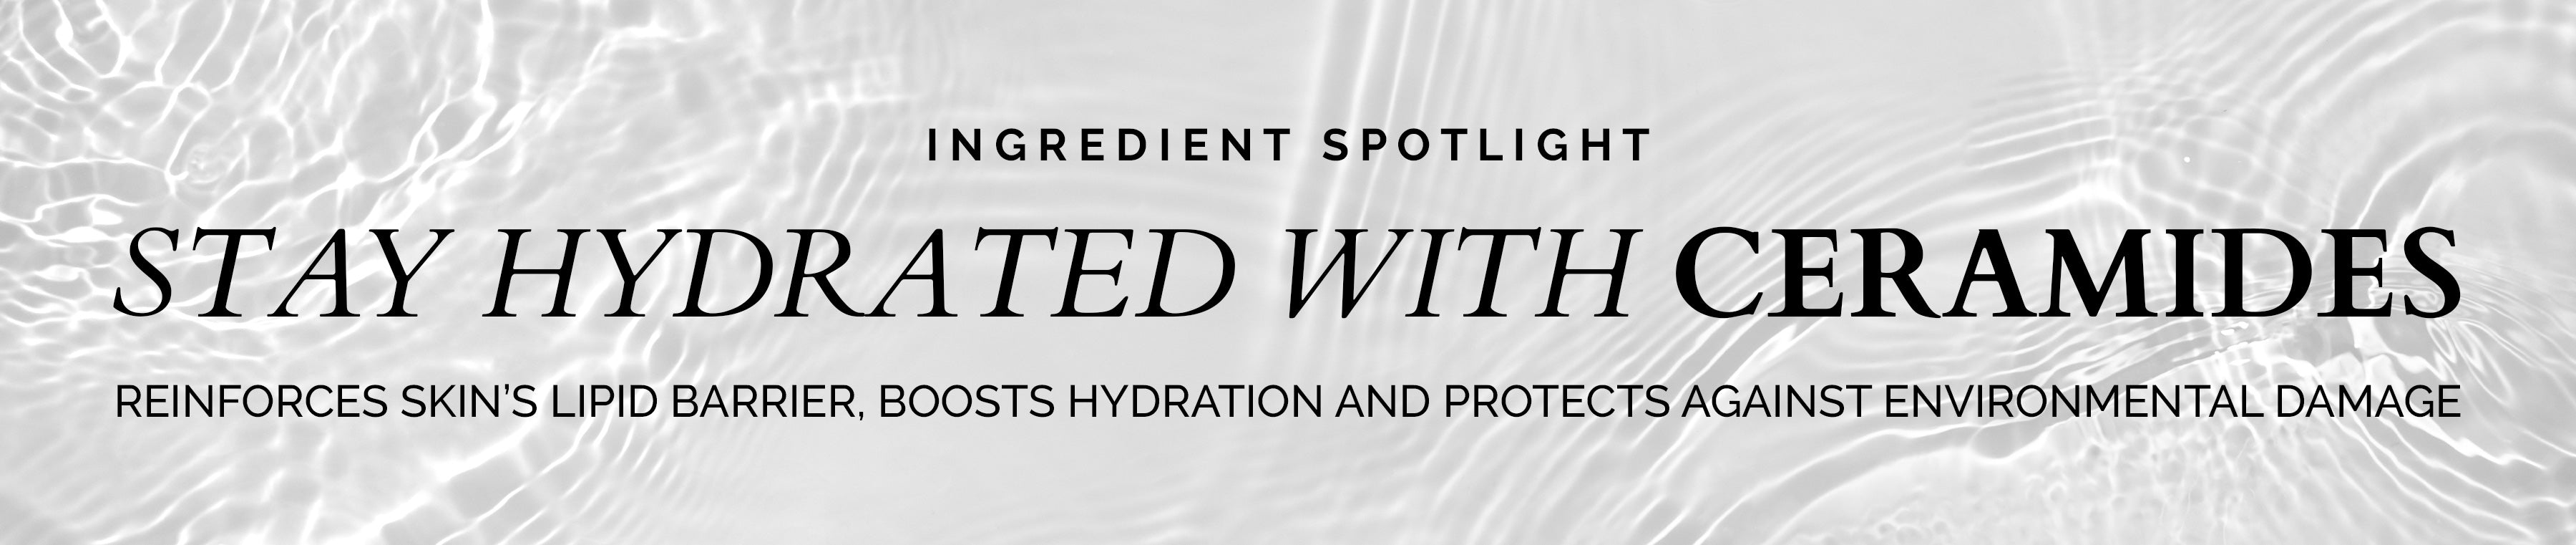 Ingredient Spotlight: Stay Hydrated with Ceramides - Reinforces skin's lipid barrier, boosts hydration and protects against environmental damage